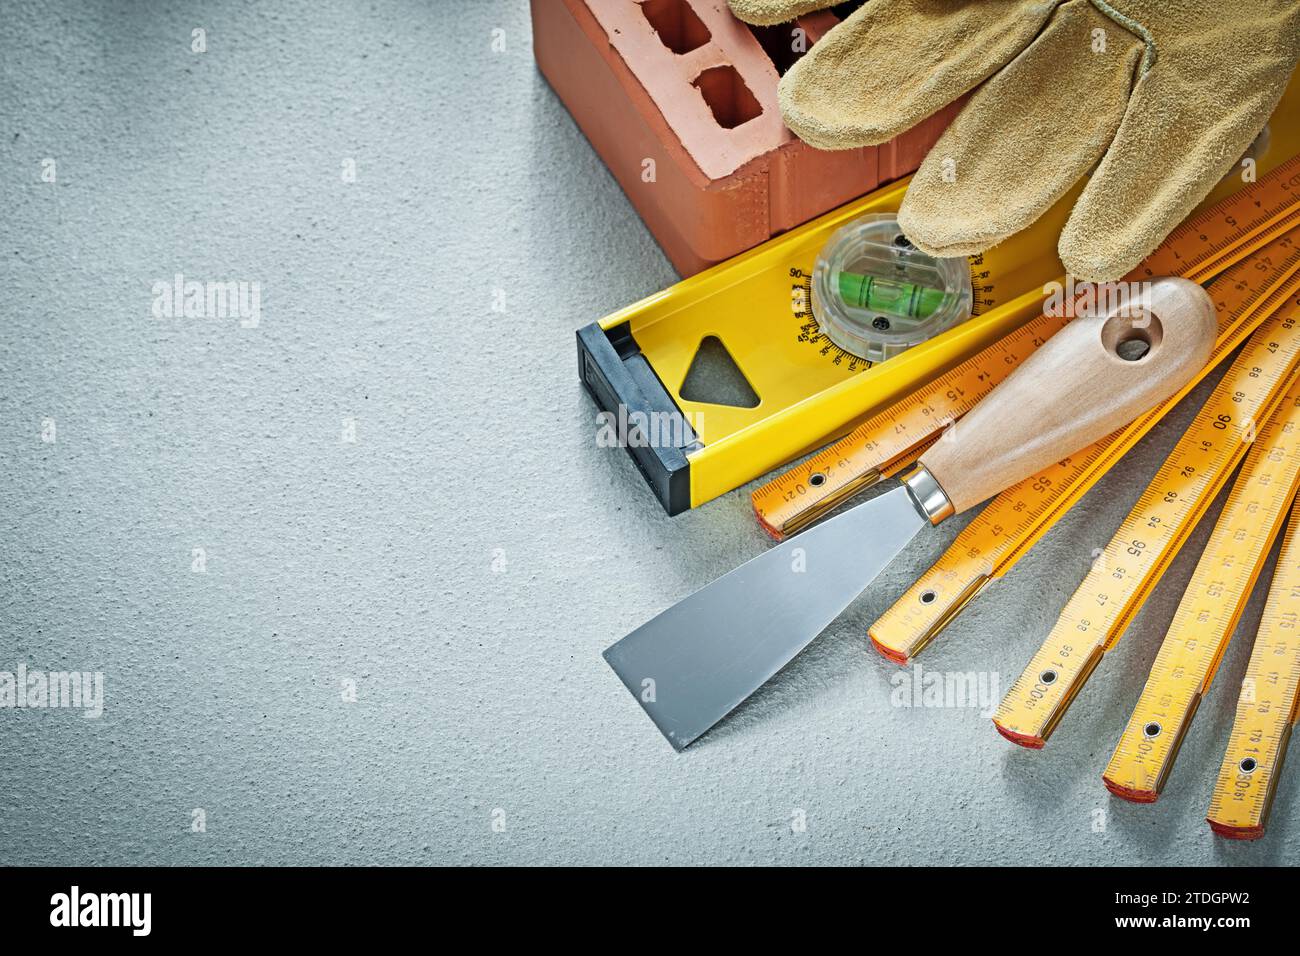 Red brick working gloves plastering trowel construction level wooden meter on concrete background bricklaying concept Stock Photo